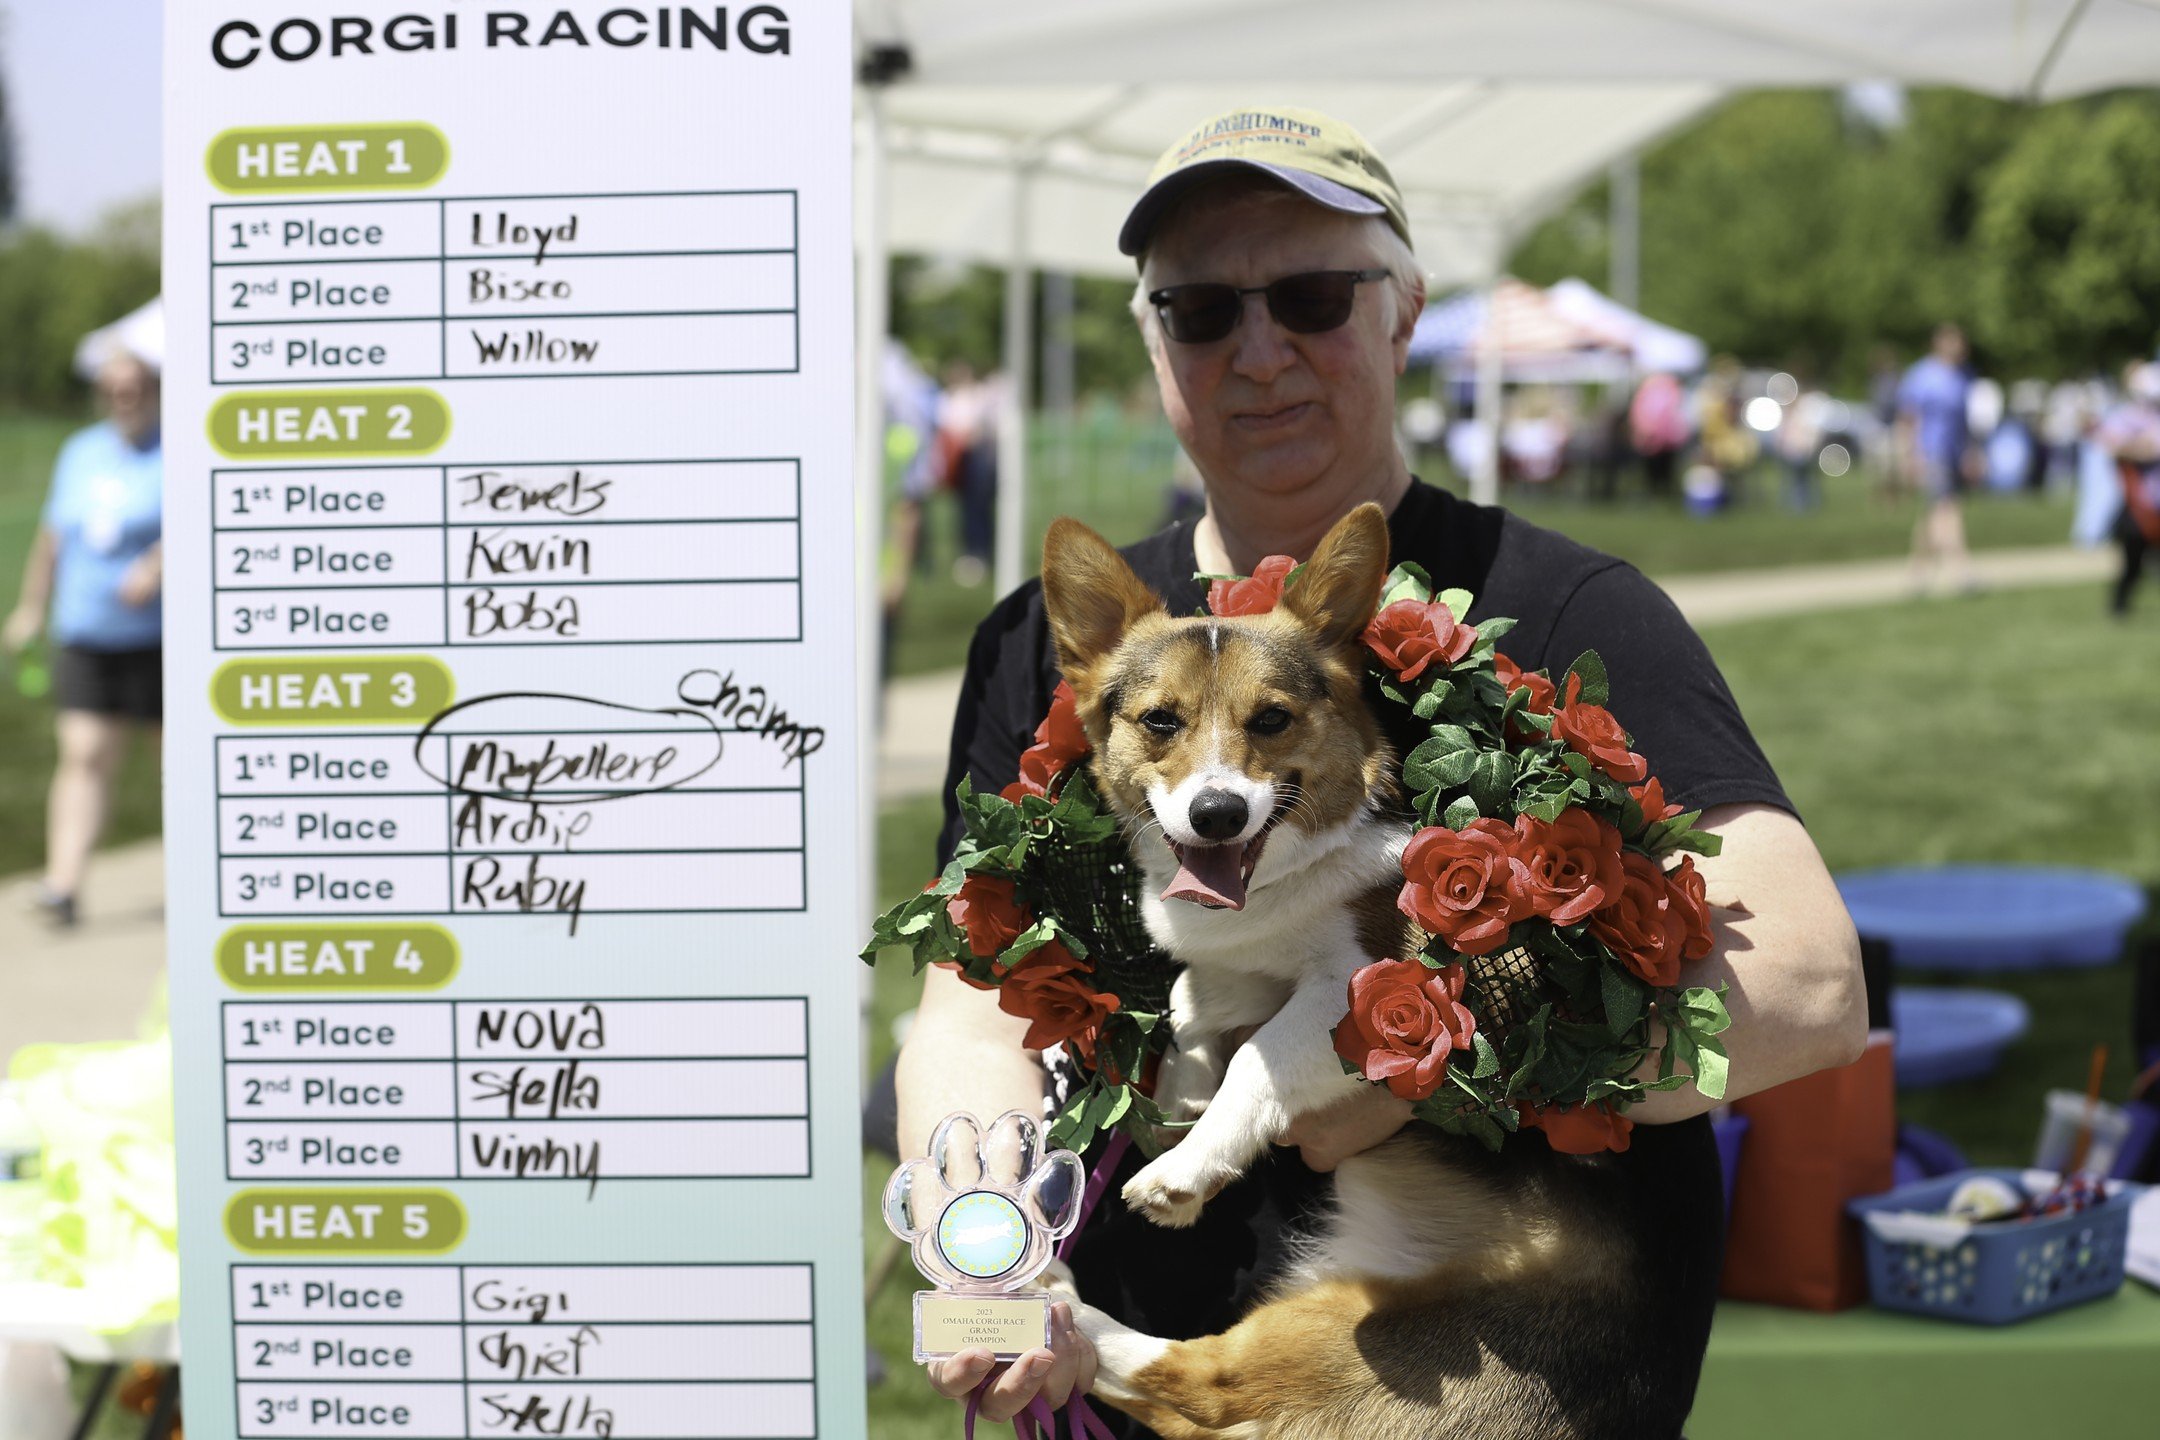 #TBT to last year's Corgi Races! The 4th annual Omaha Corgi Races are this Saturday! Go out and watch man's best friend on the 11th!